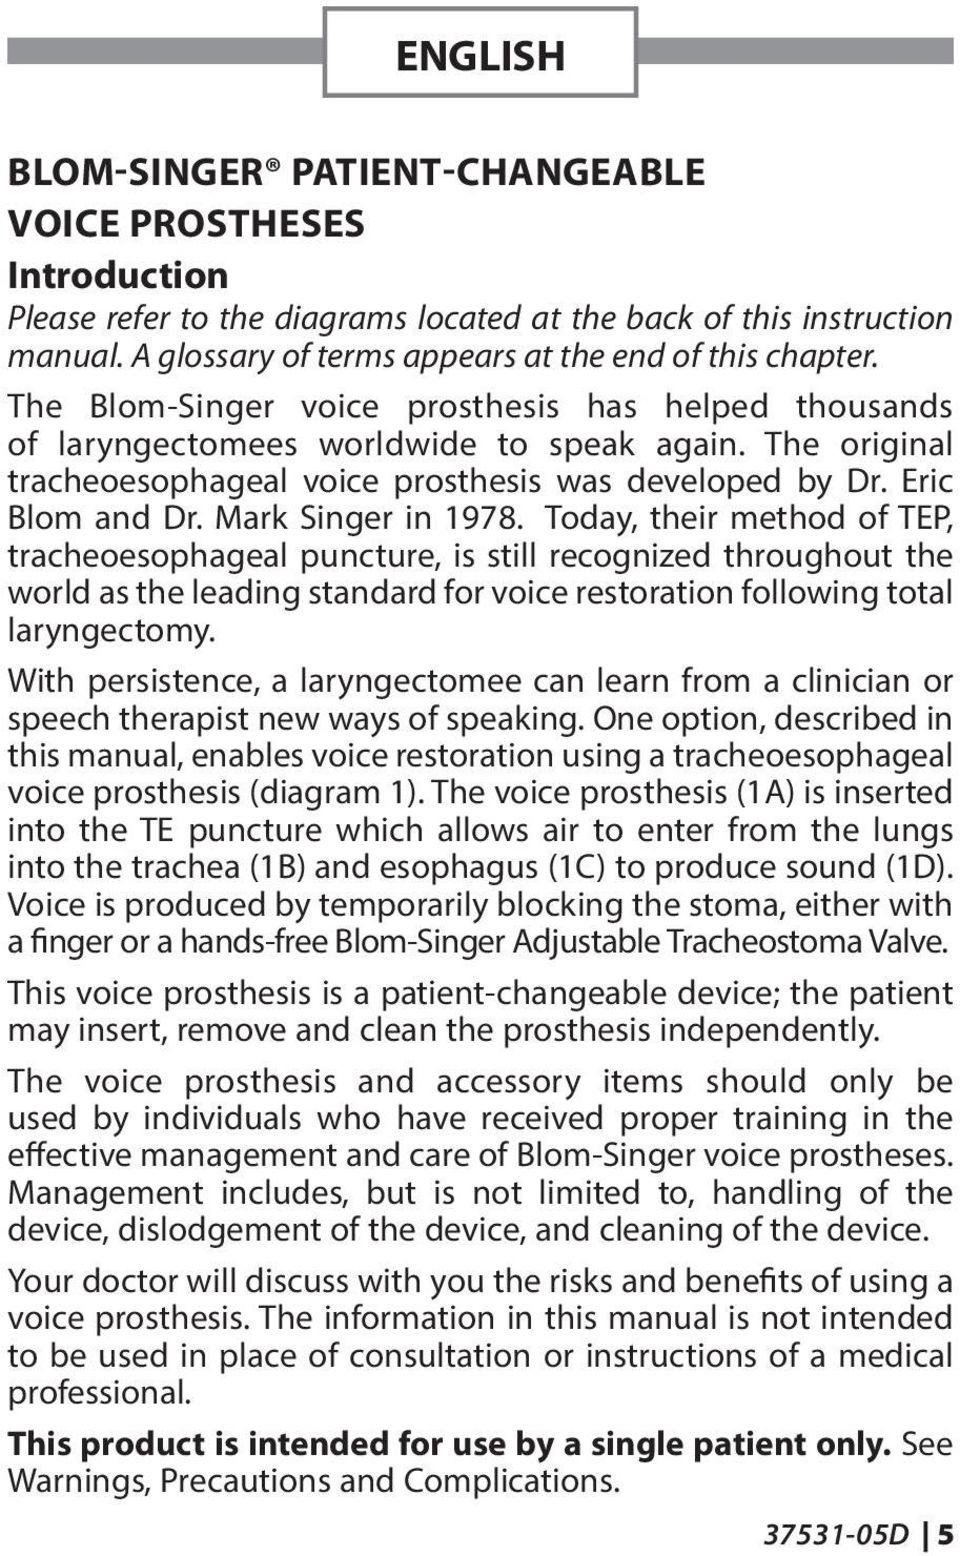 The original tracheoesophageal voice prosthesis was developed by Dr. Eric Blom and Dr. Mark Singer in 1978.